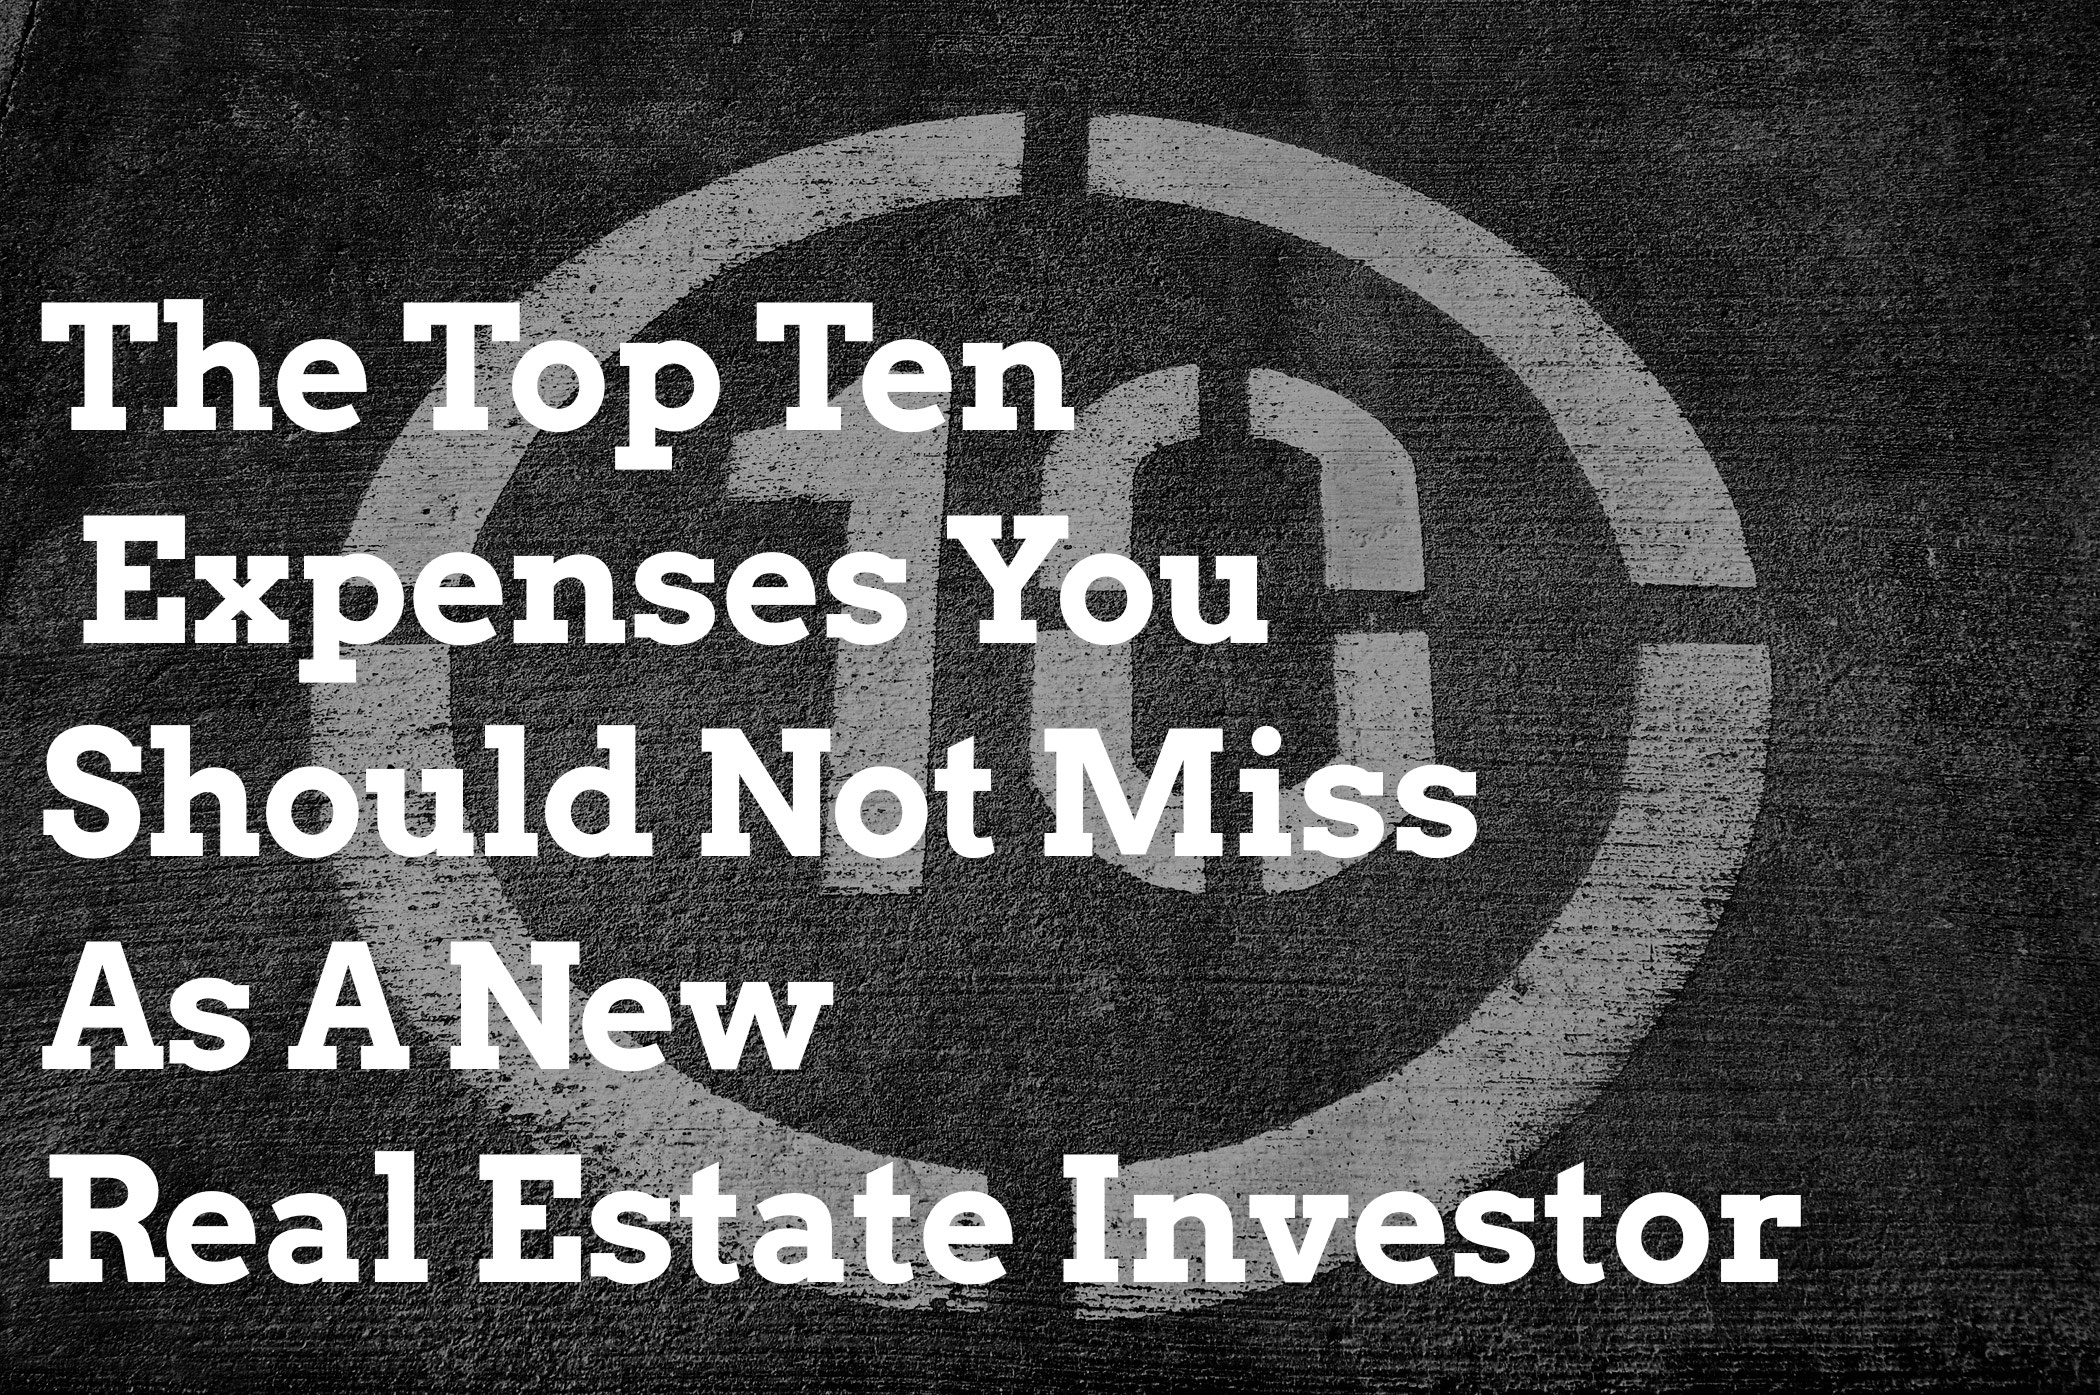 The Top Ten Expenses You should Not Miss as a New Real Estate Investor